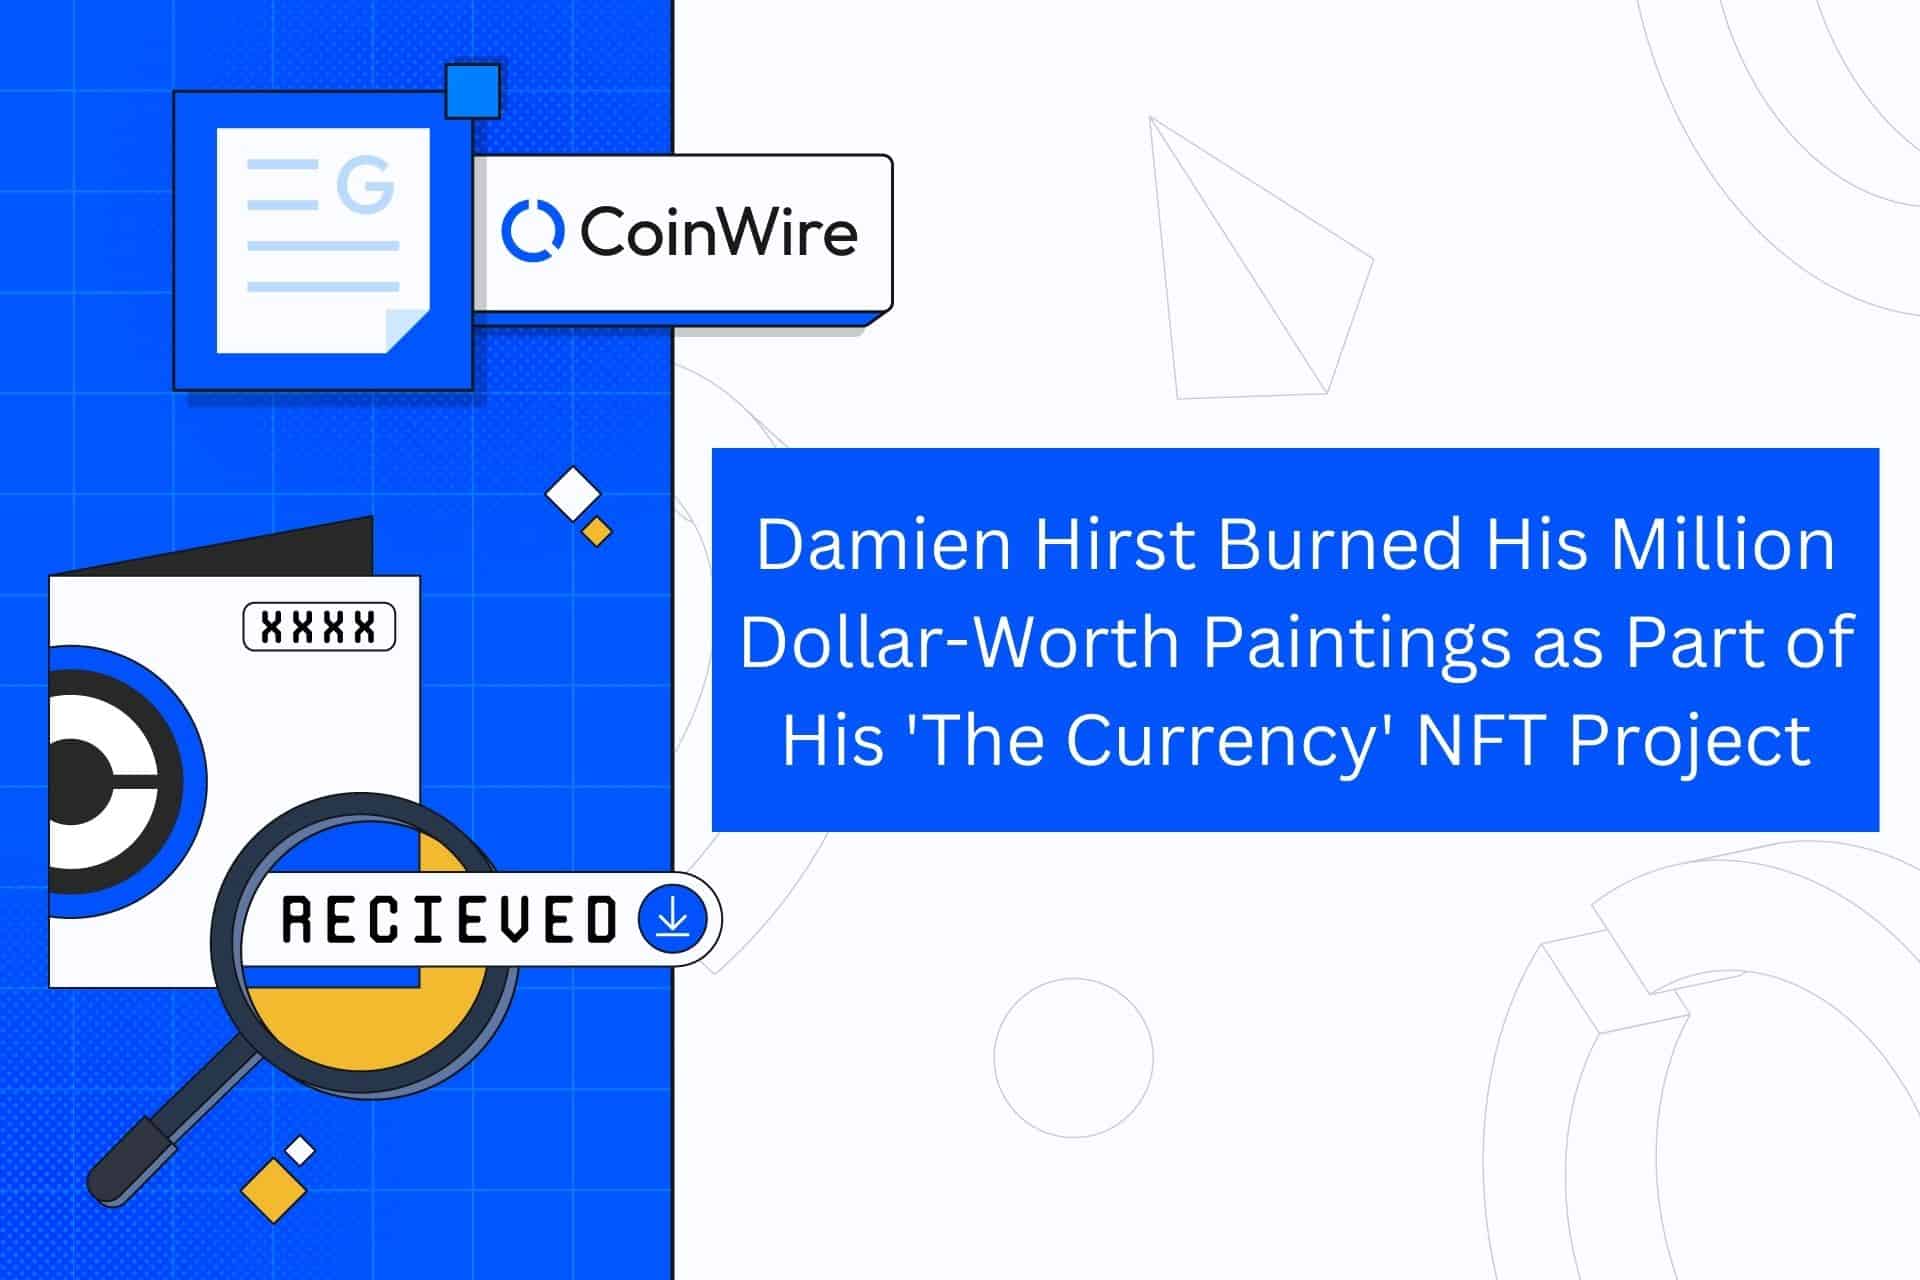 Damien Hirst Burned His Million Dollar-Worth Paintings As Part Of His 'The Currency' Nft Project